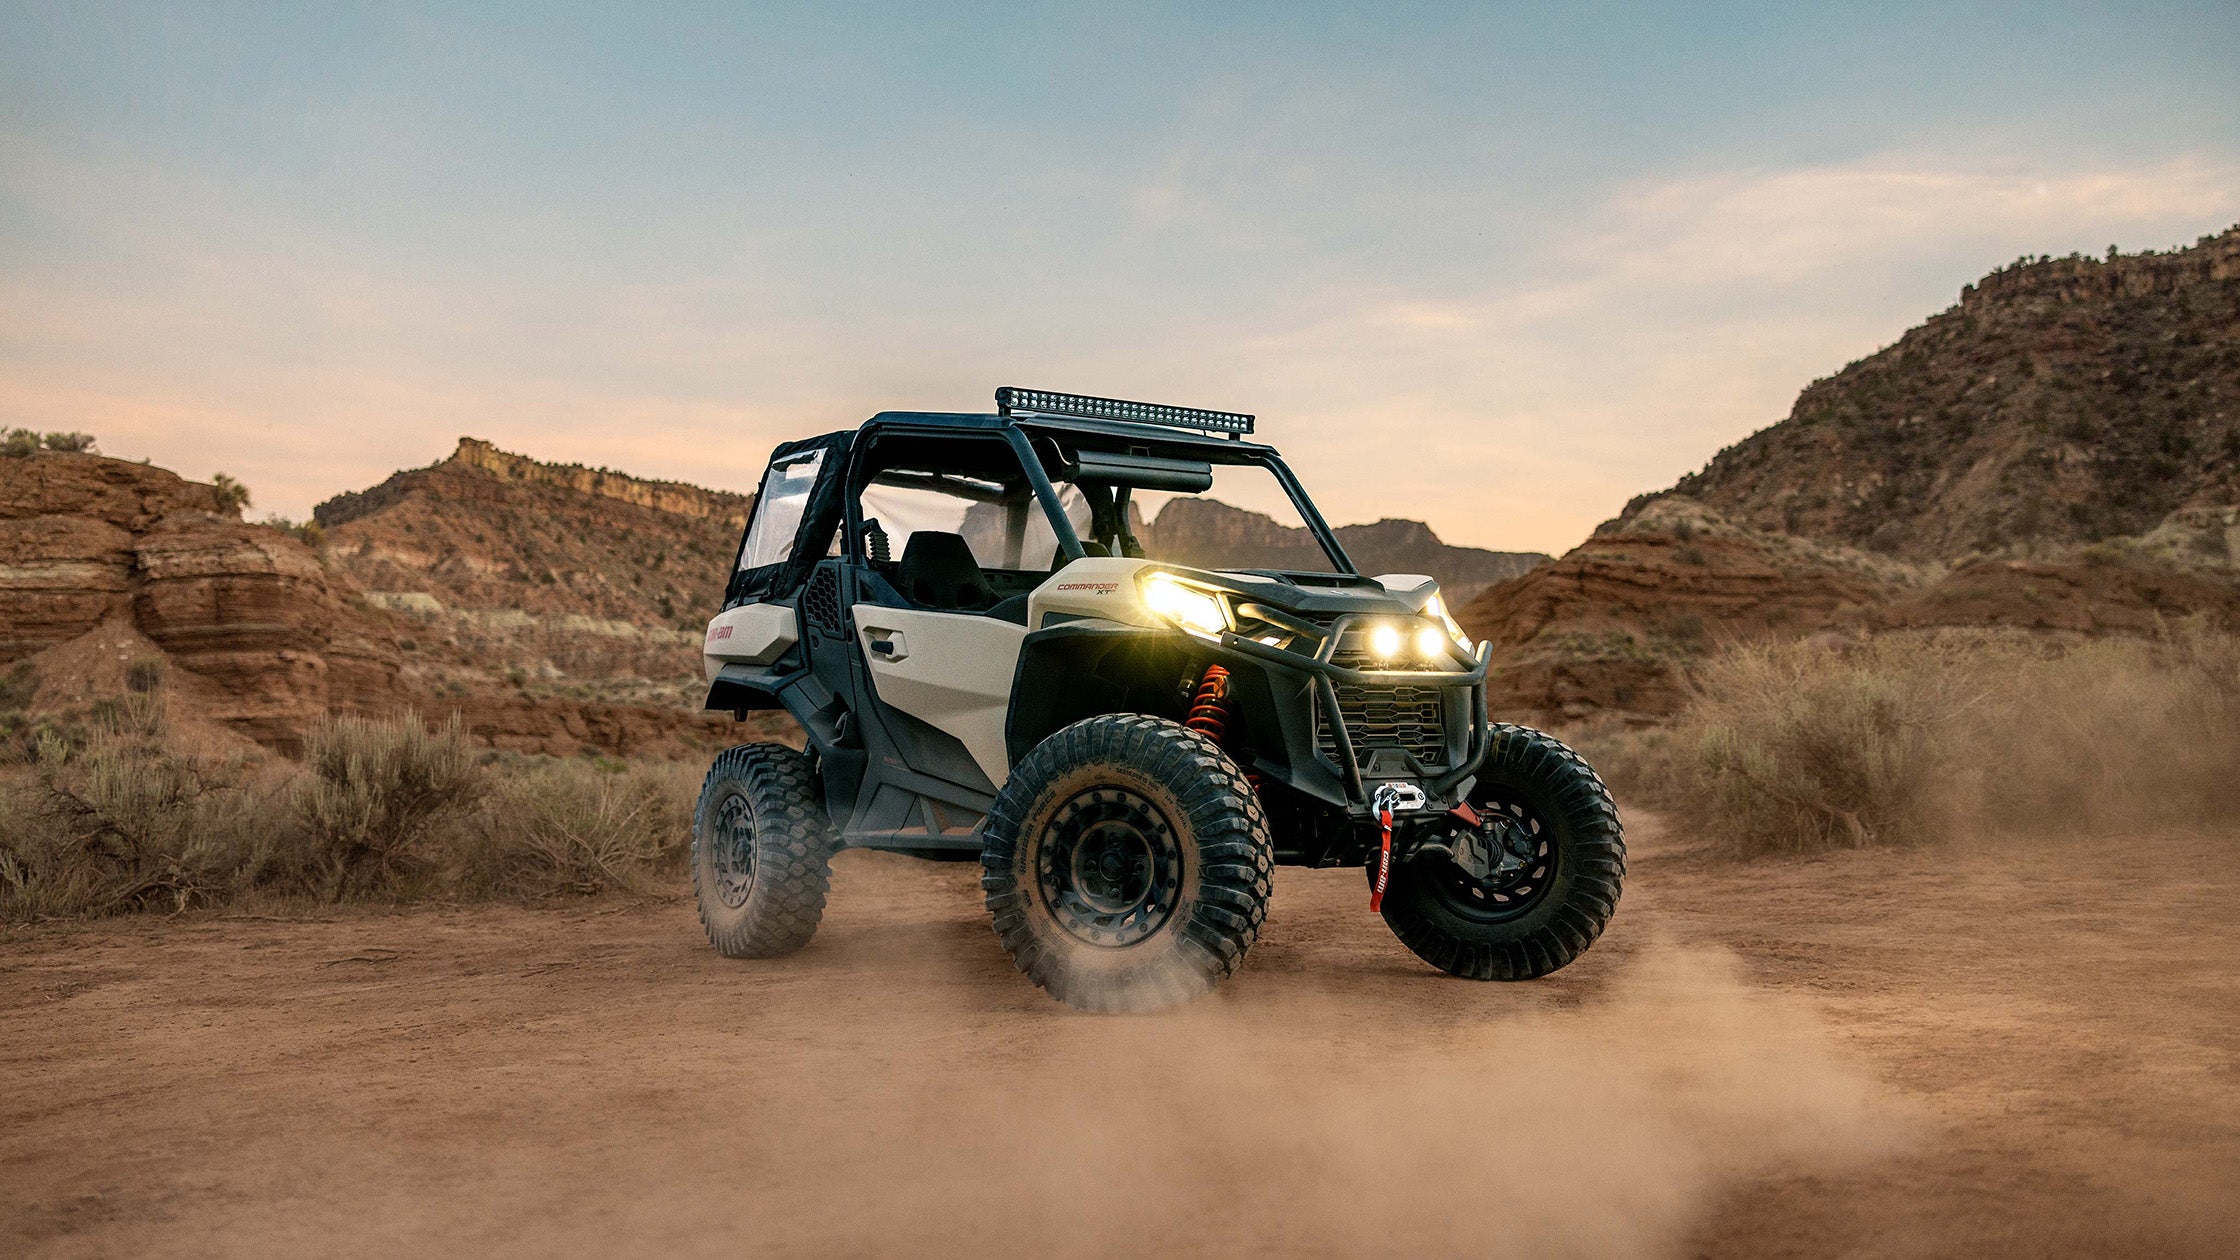 Can-Am Commander (side-by-side) equipped with a PERFEX Industries lift kit, powerfully navigating the desert terrain, showcasing the vehicle's enhanced off-road capabilities and ruggedness.